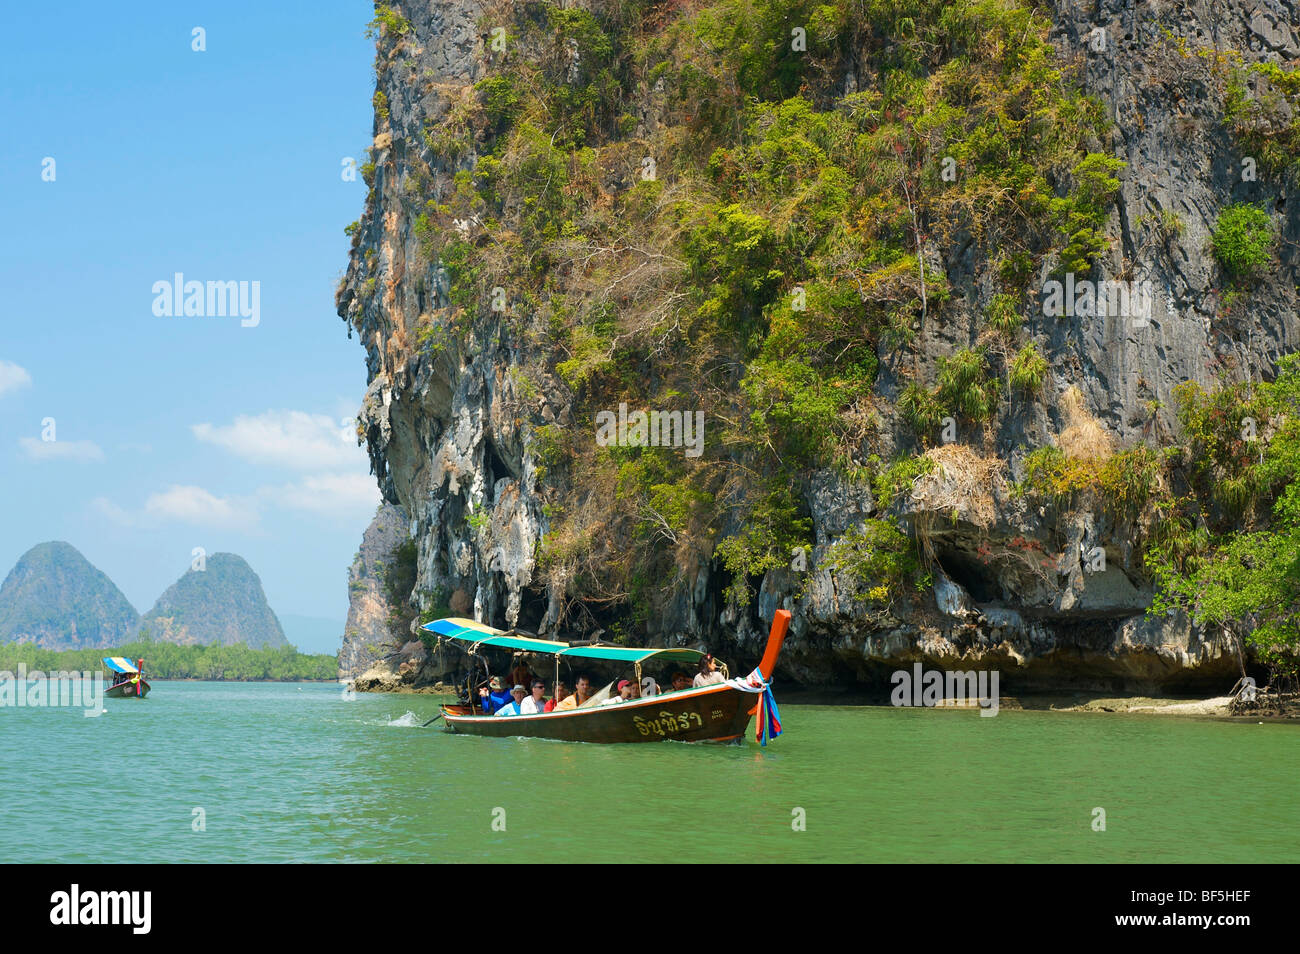 Long-tail boats in the Phnag Nga Bay, Thailand, Asia Stock Photo